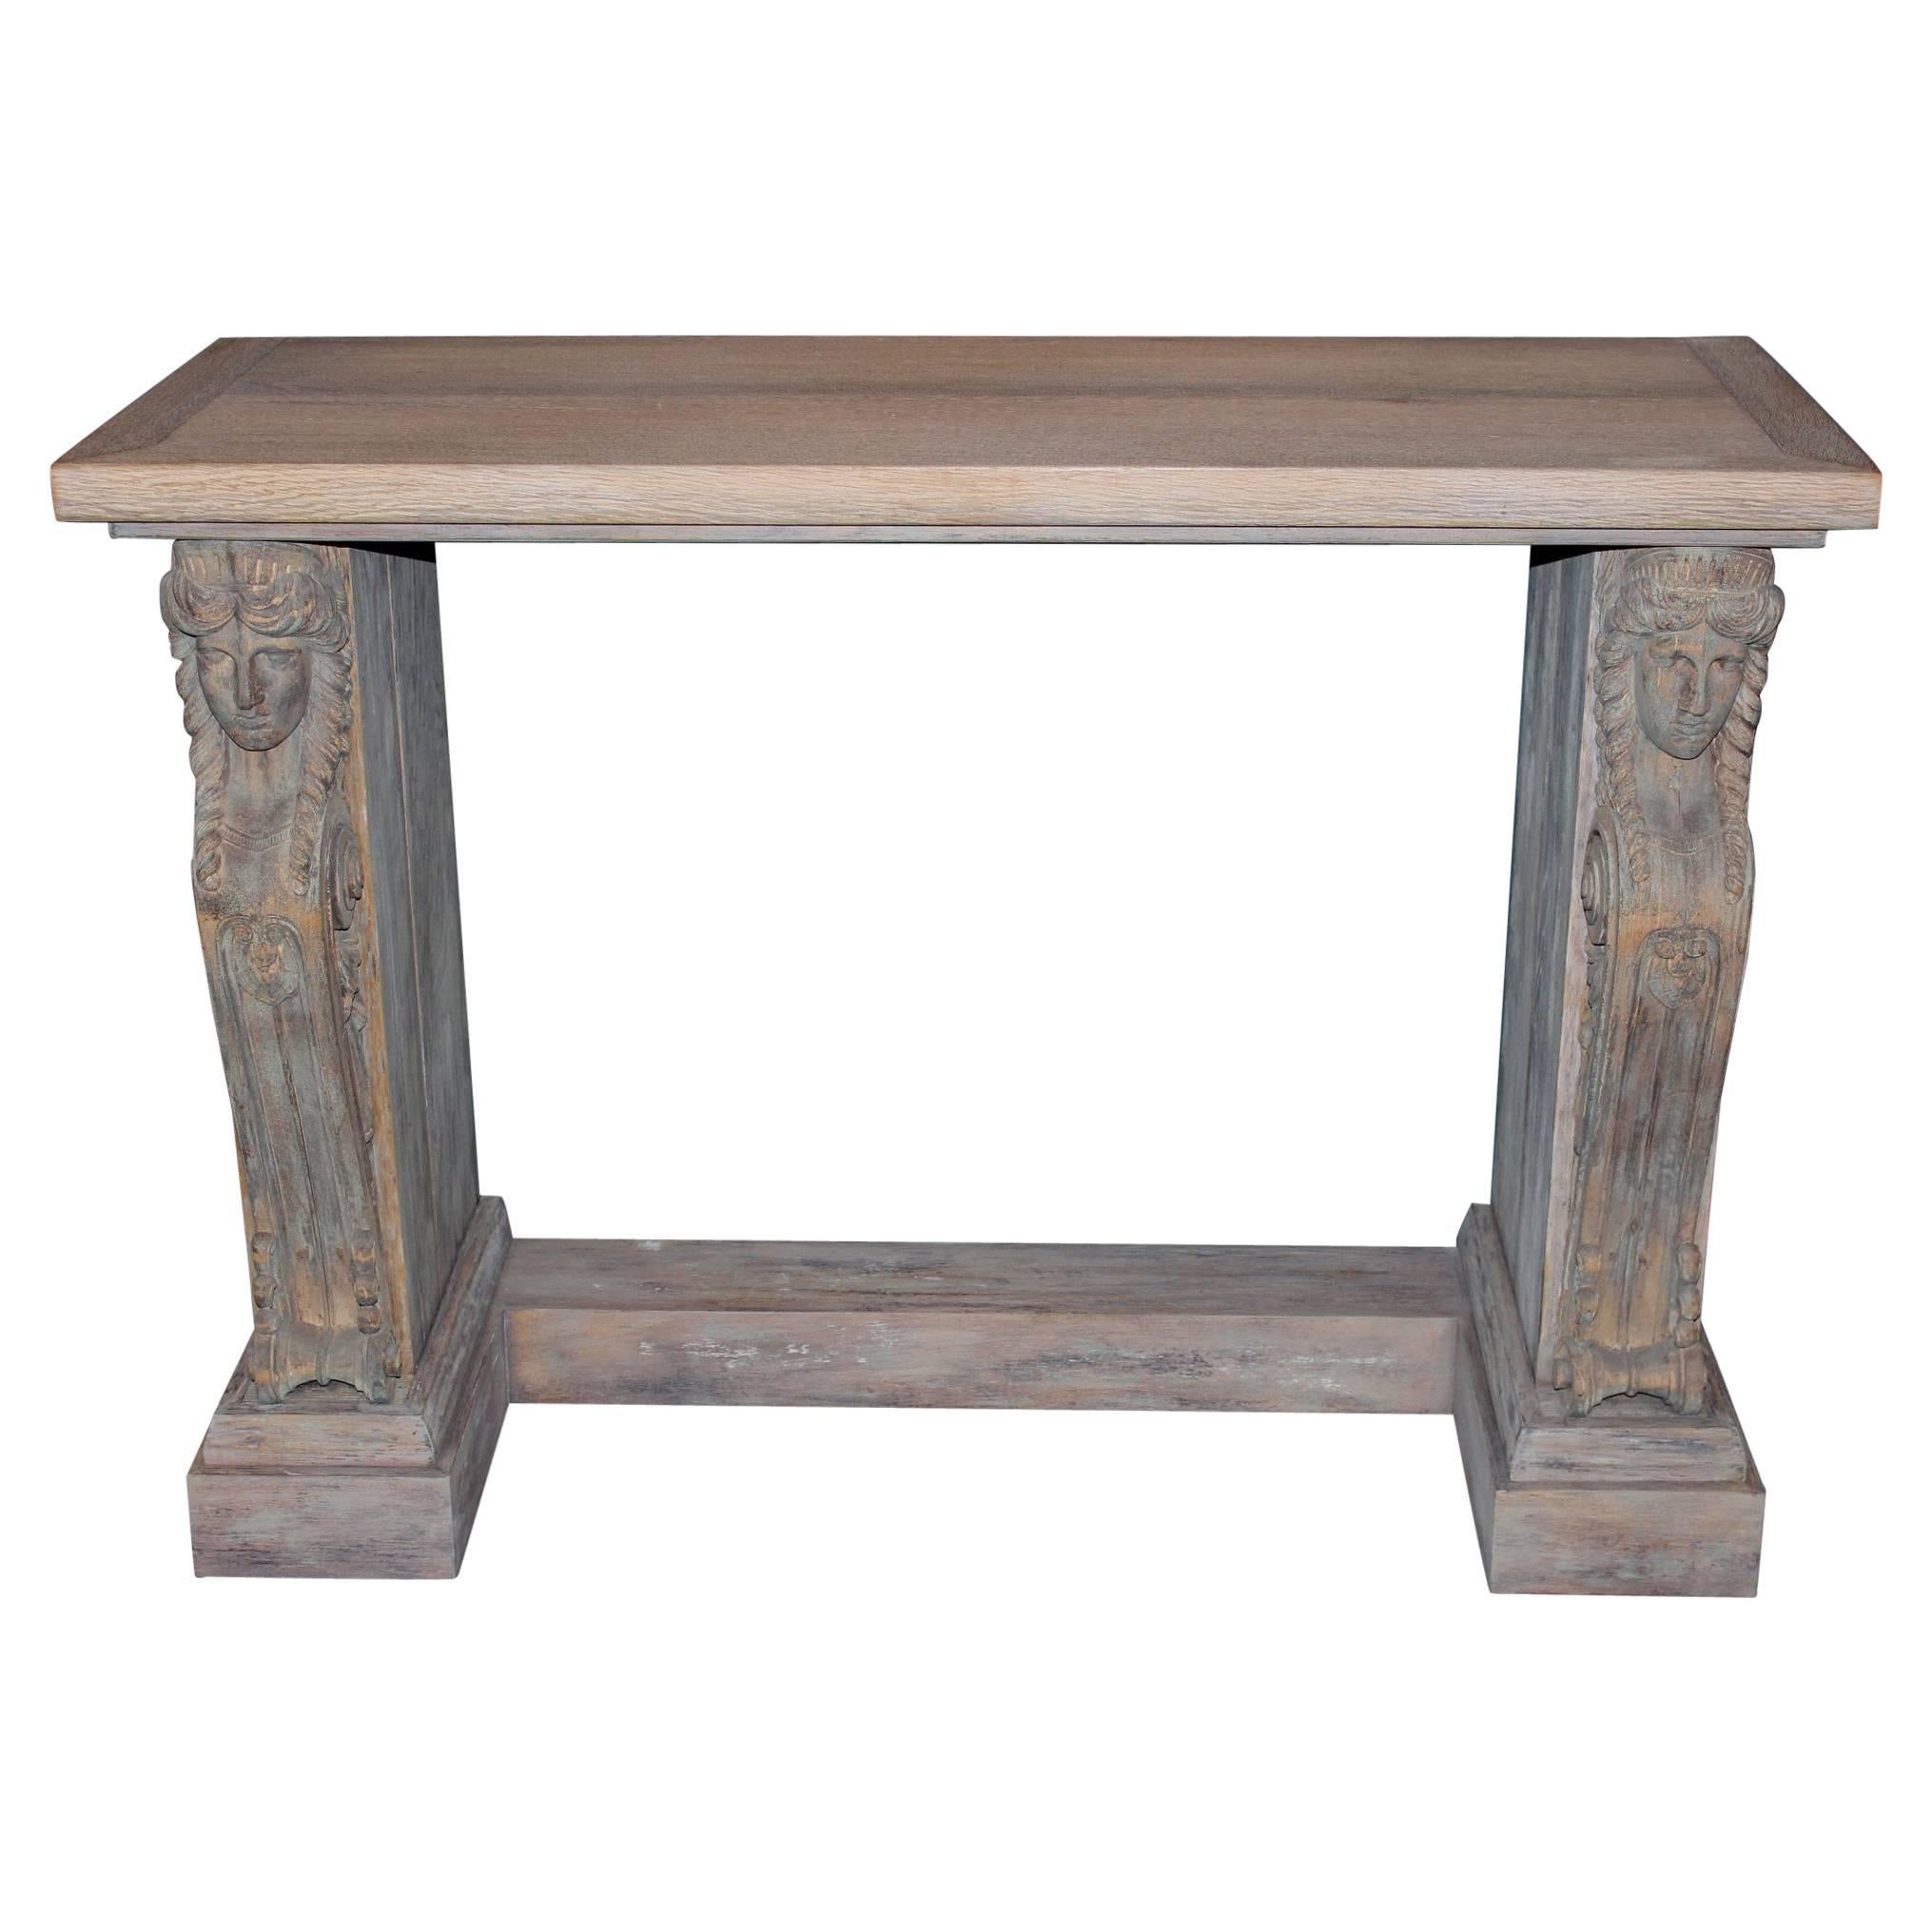 French Empire Style Console with 19th Century Figural Caryatids